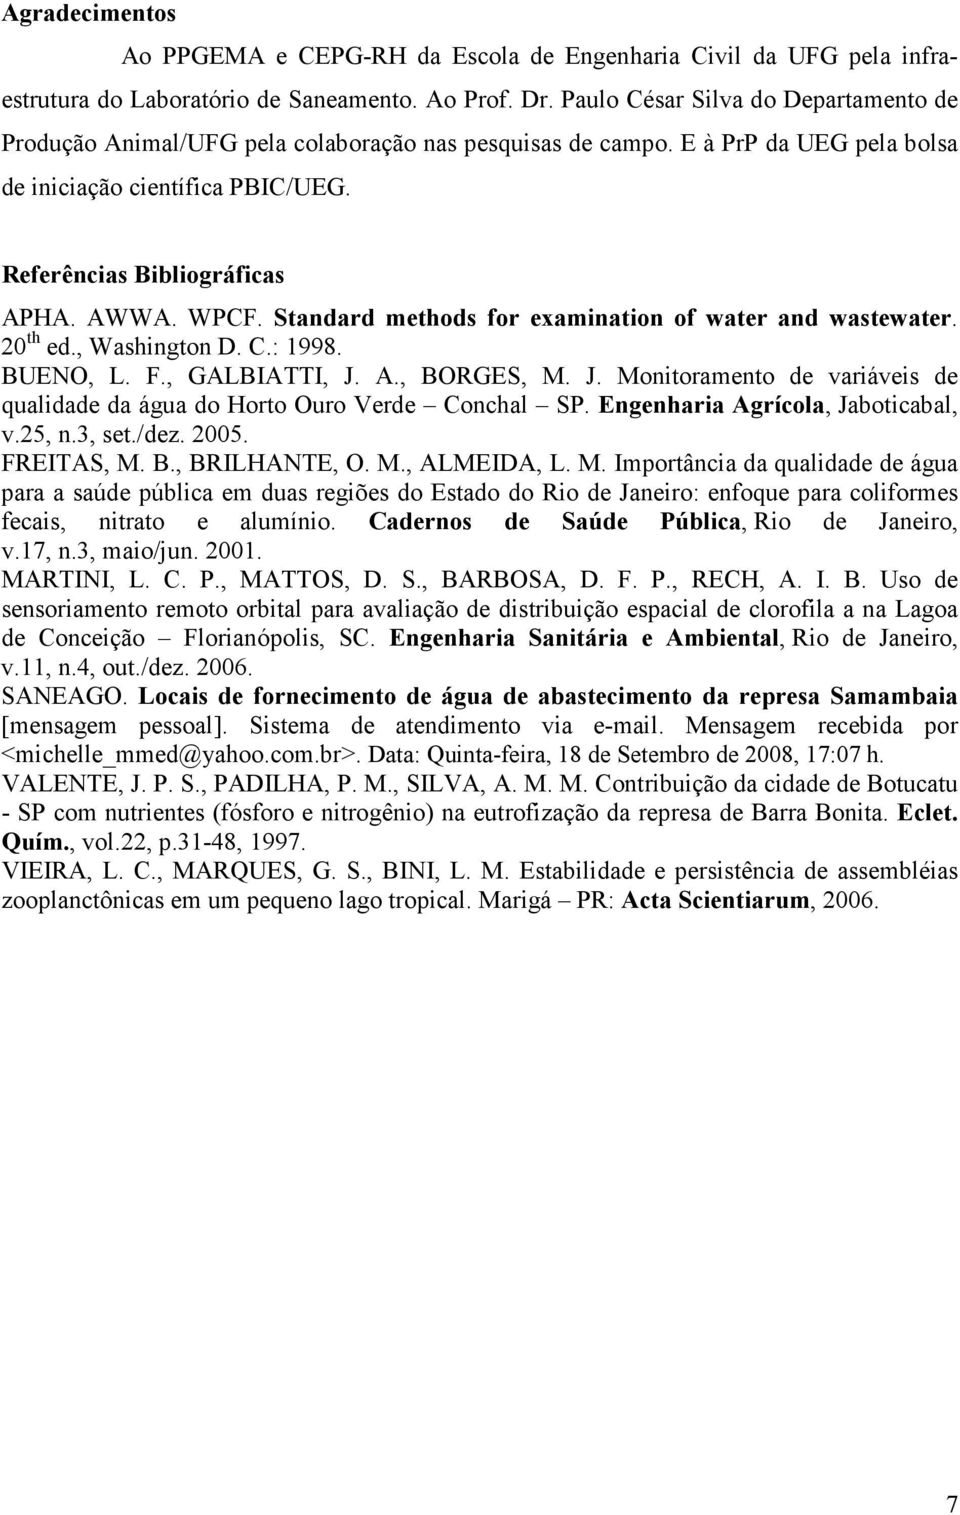 WPCF. Standard methods for examination of water and wastewater. 20 th ed., Washington D. C.: 1998. BUENO, L. F., GALBIATTI, J.